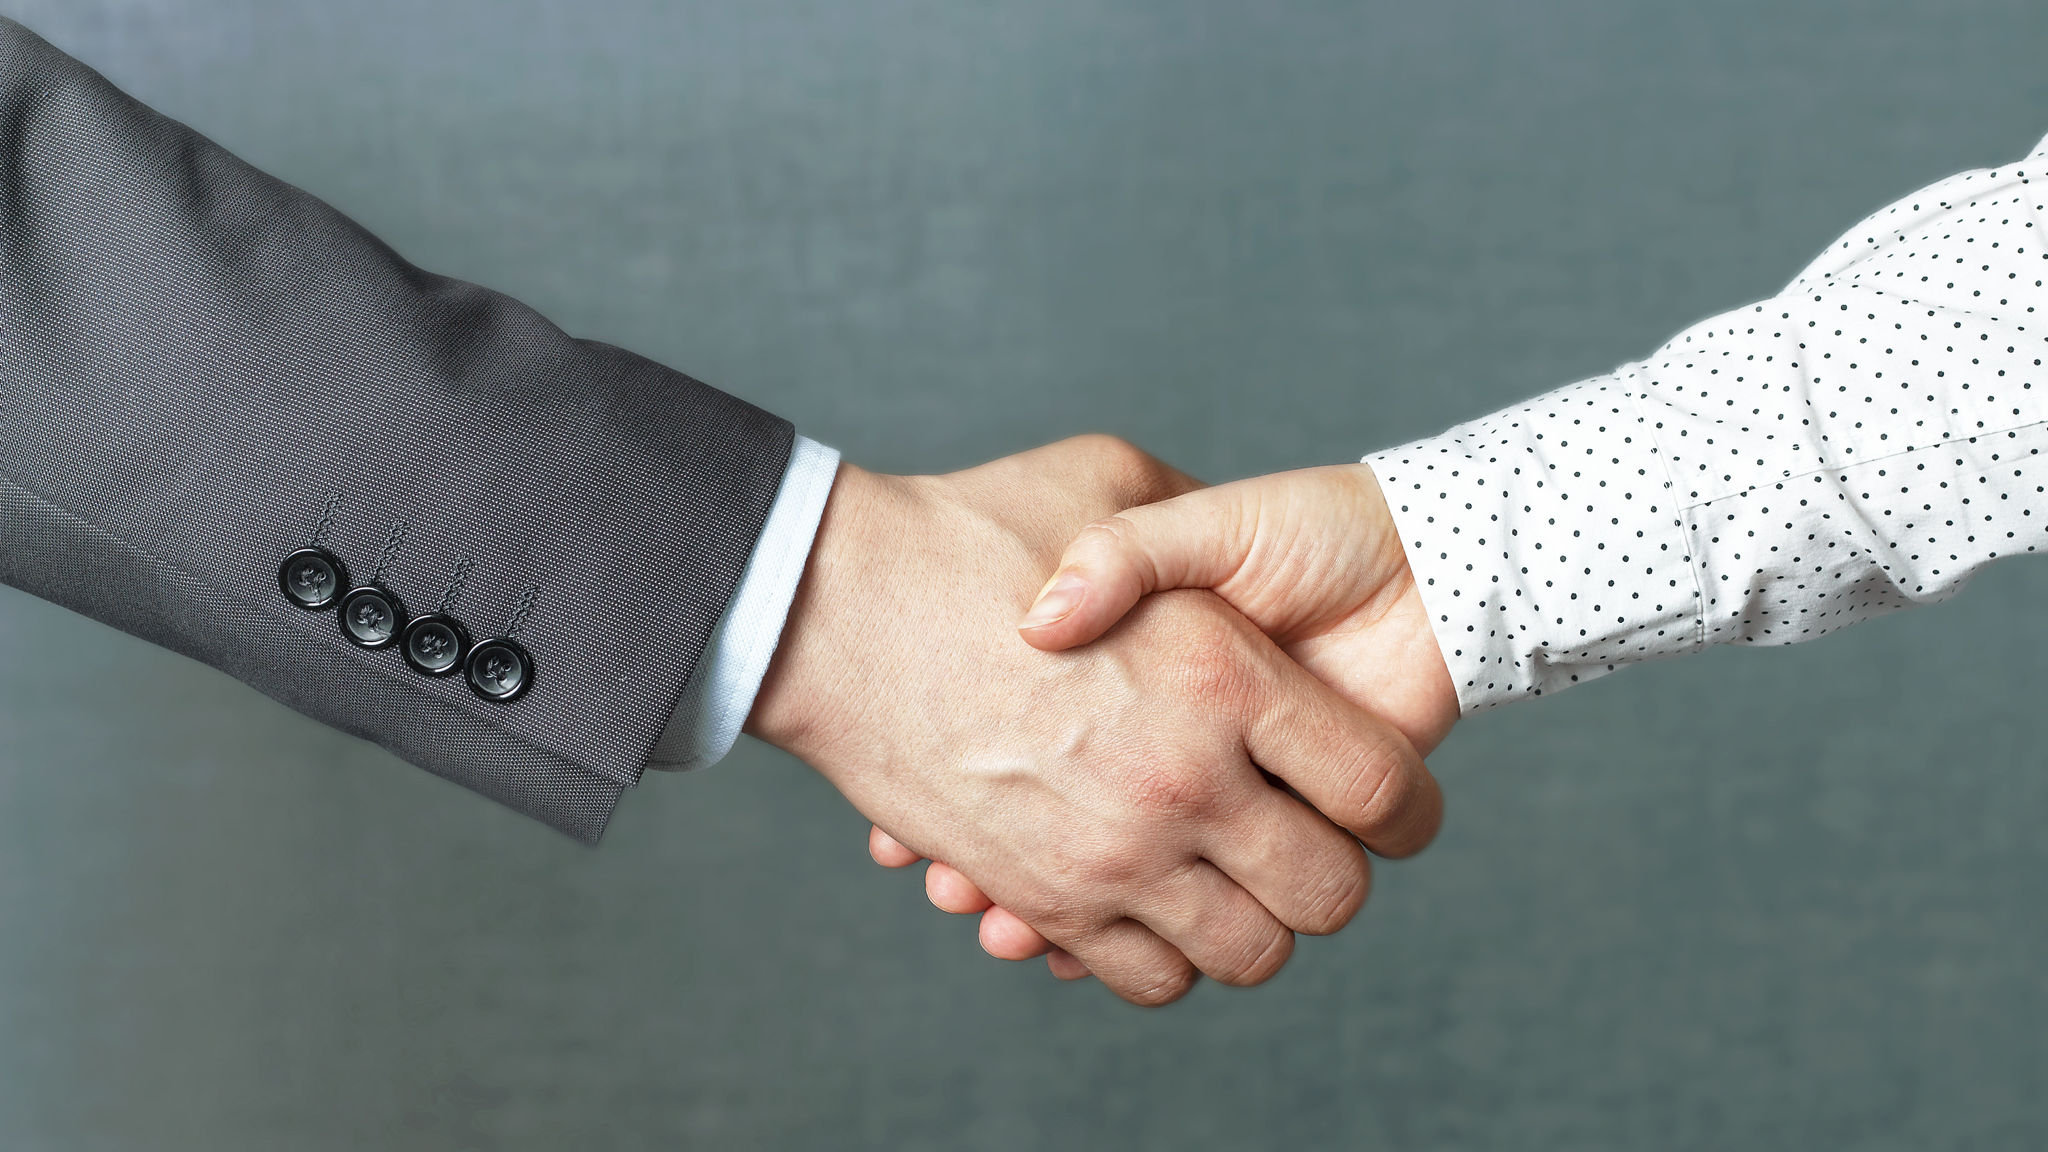 Handshake of man and woman in business clothes, close up front view